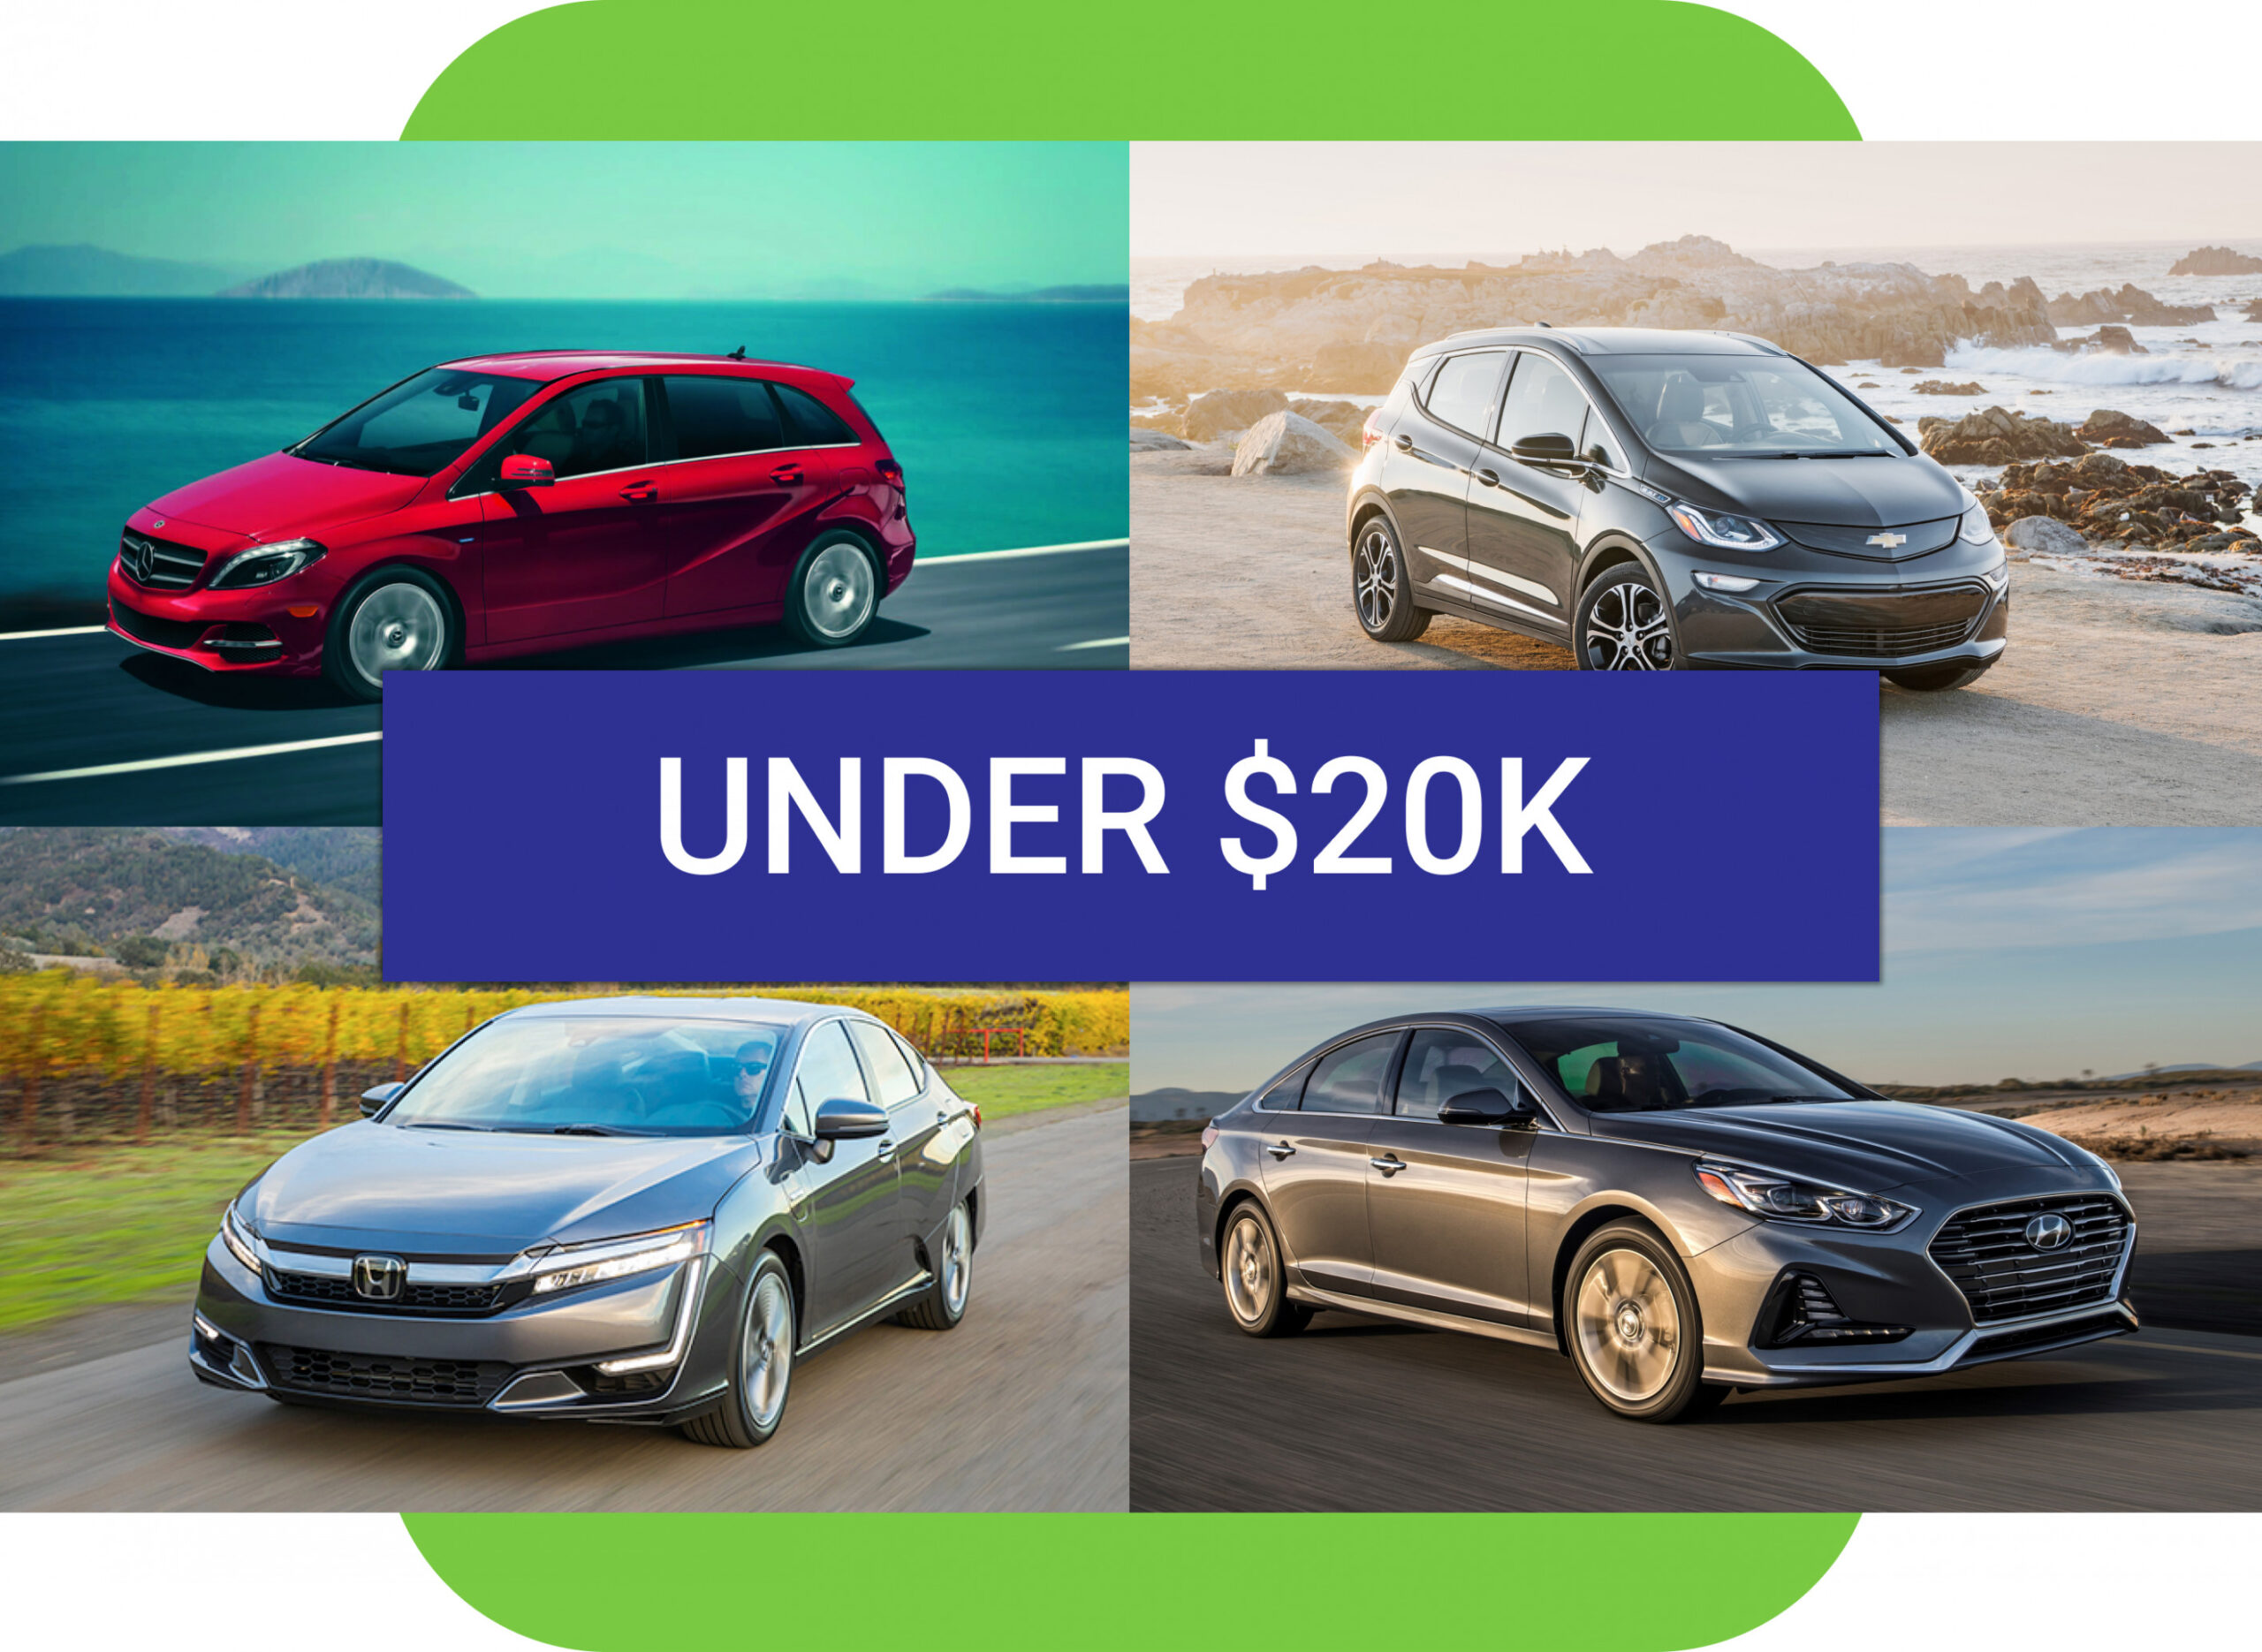 Best Used Electric Cars Under $3k and $3k and $3k - electric vehicles under 20k